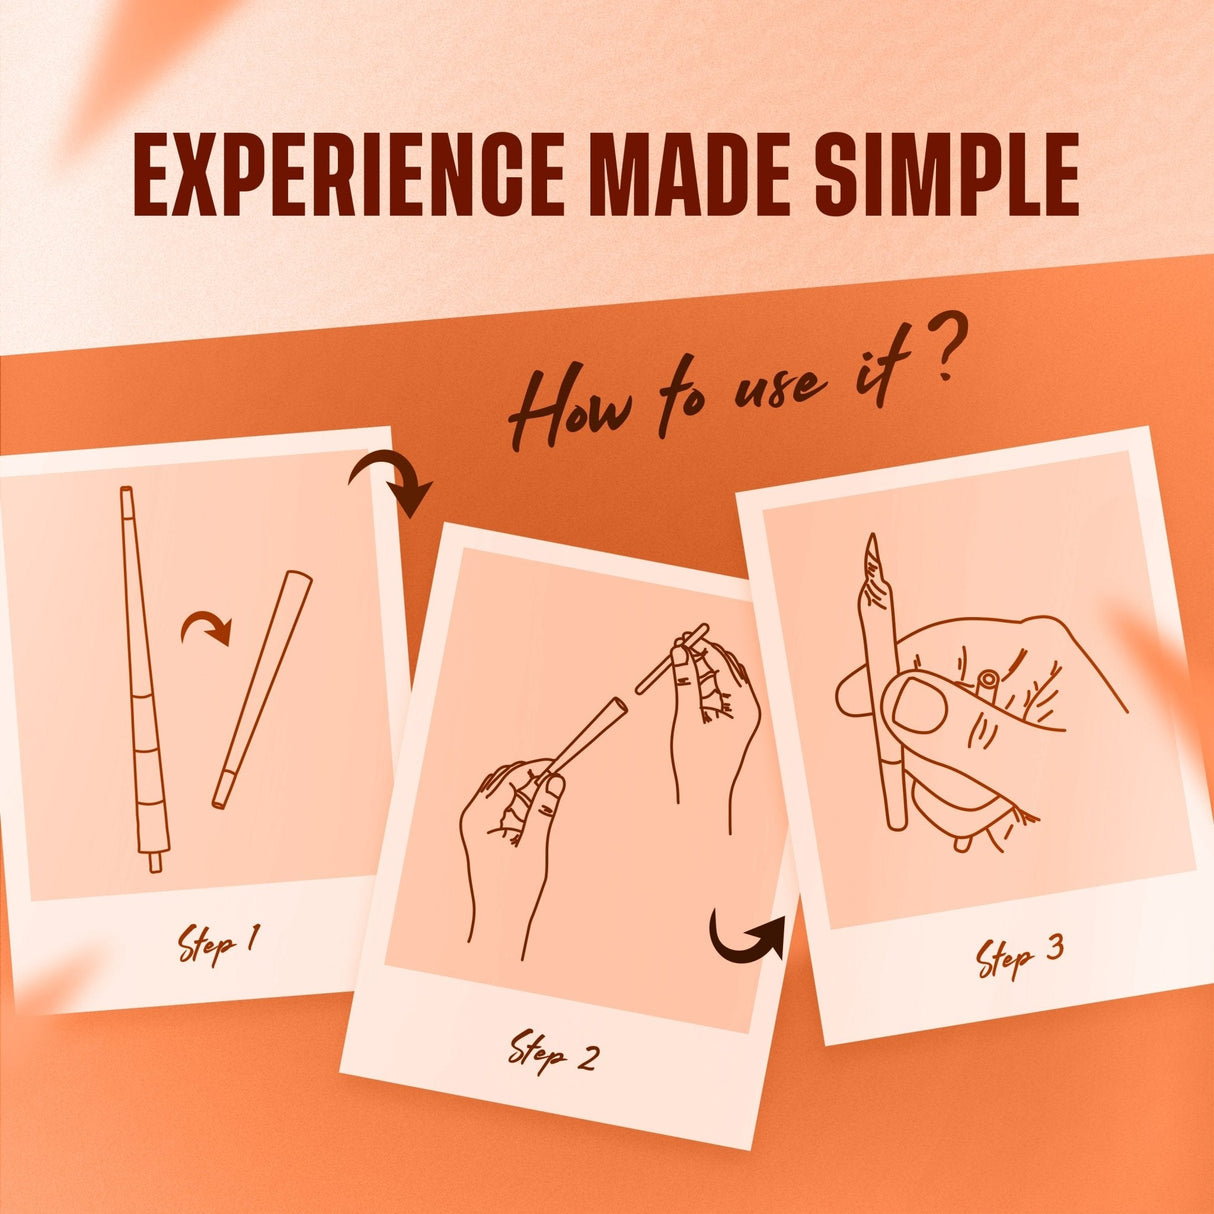 Empire Rolling Papers Ultra Smooth Dart Cones instructions illustration on orange background